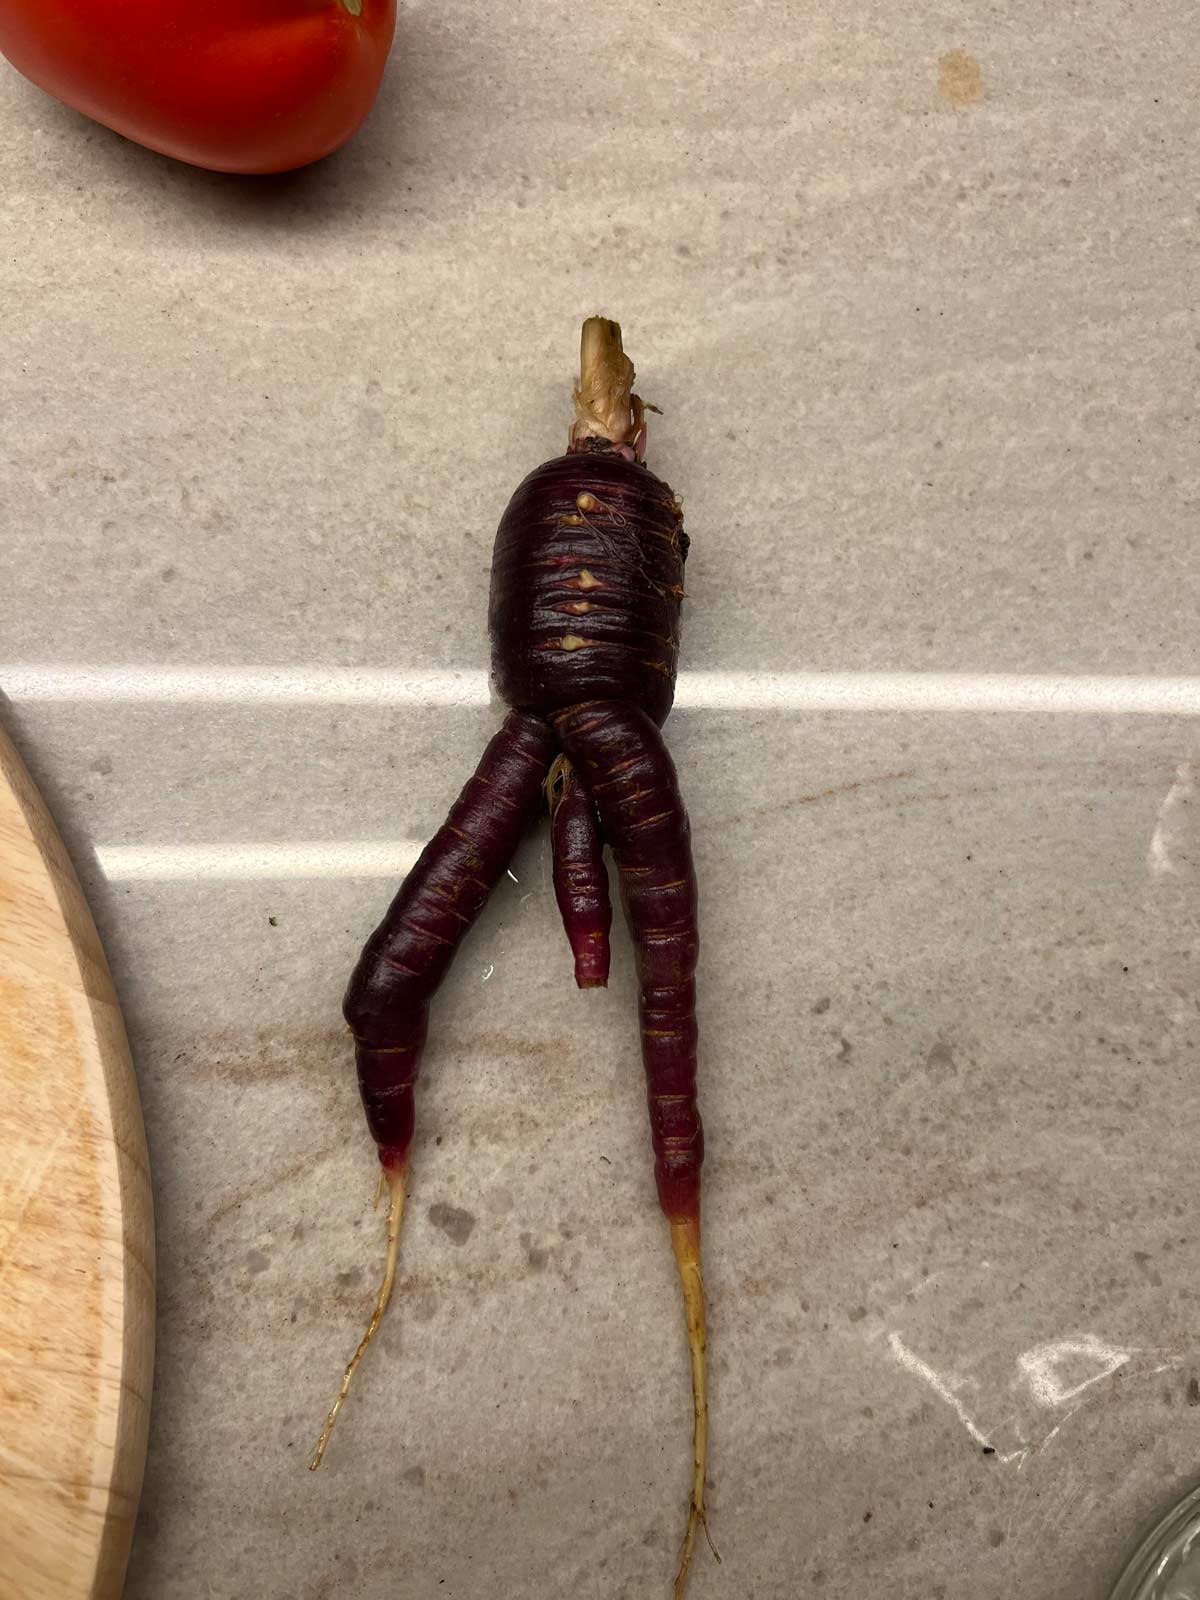 My wife grew this carrot in our greenhouse